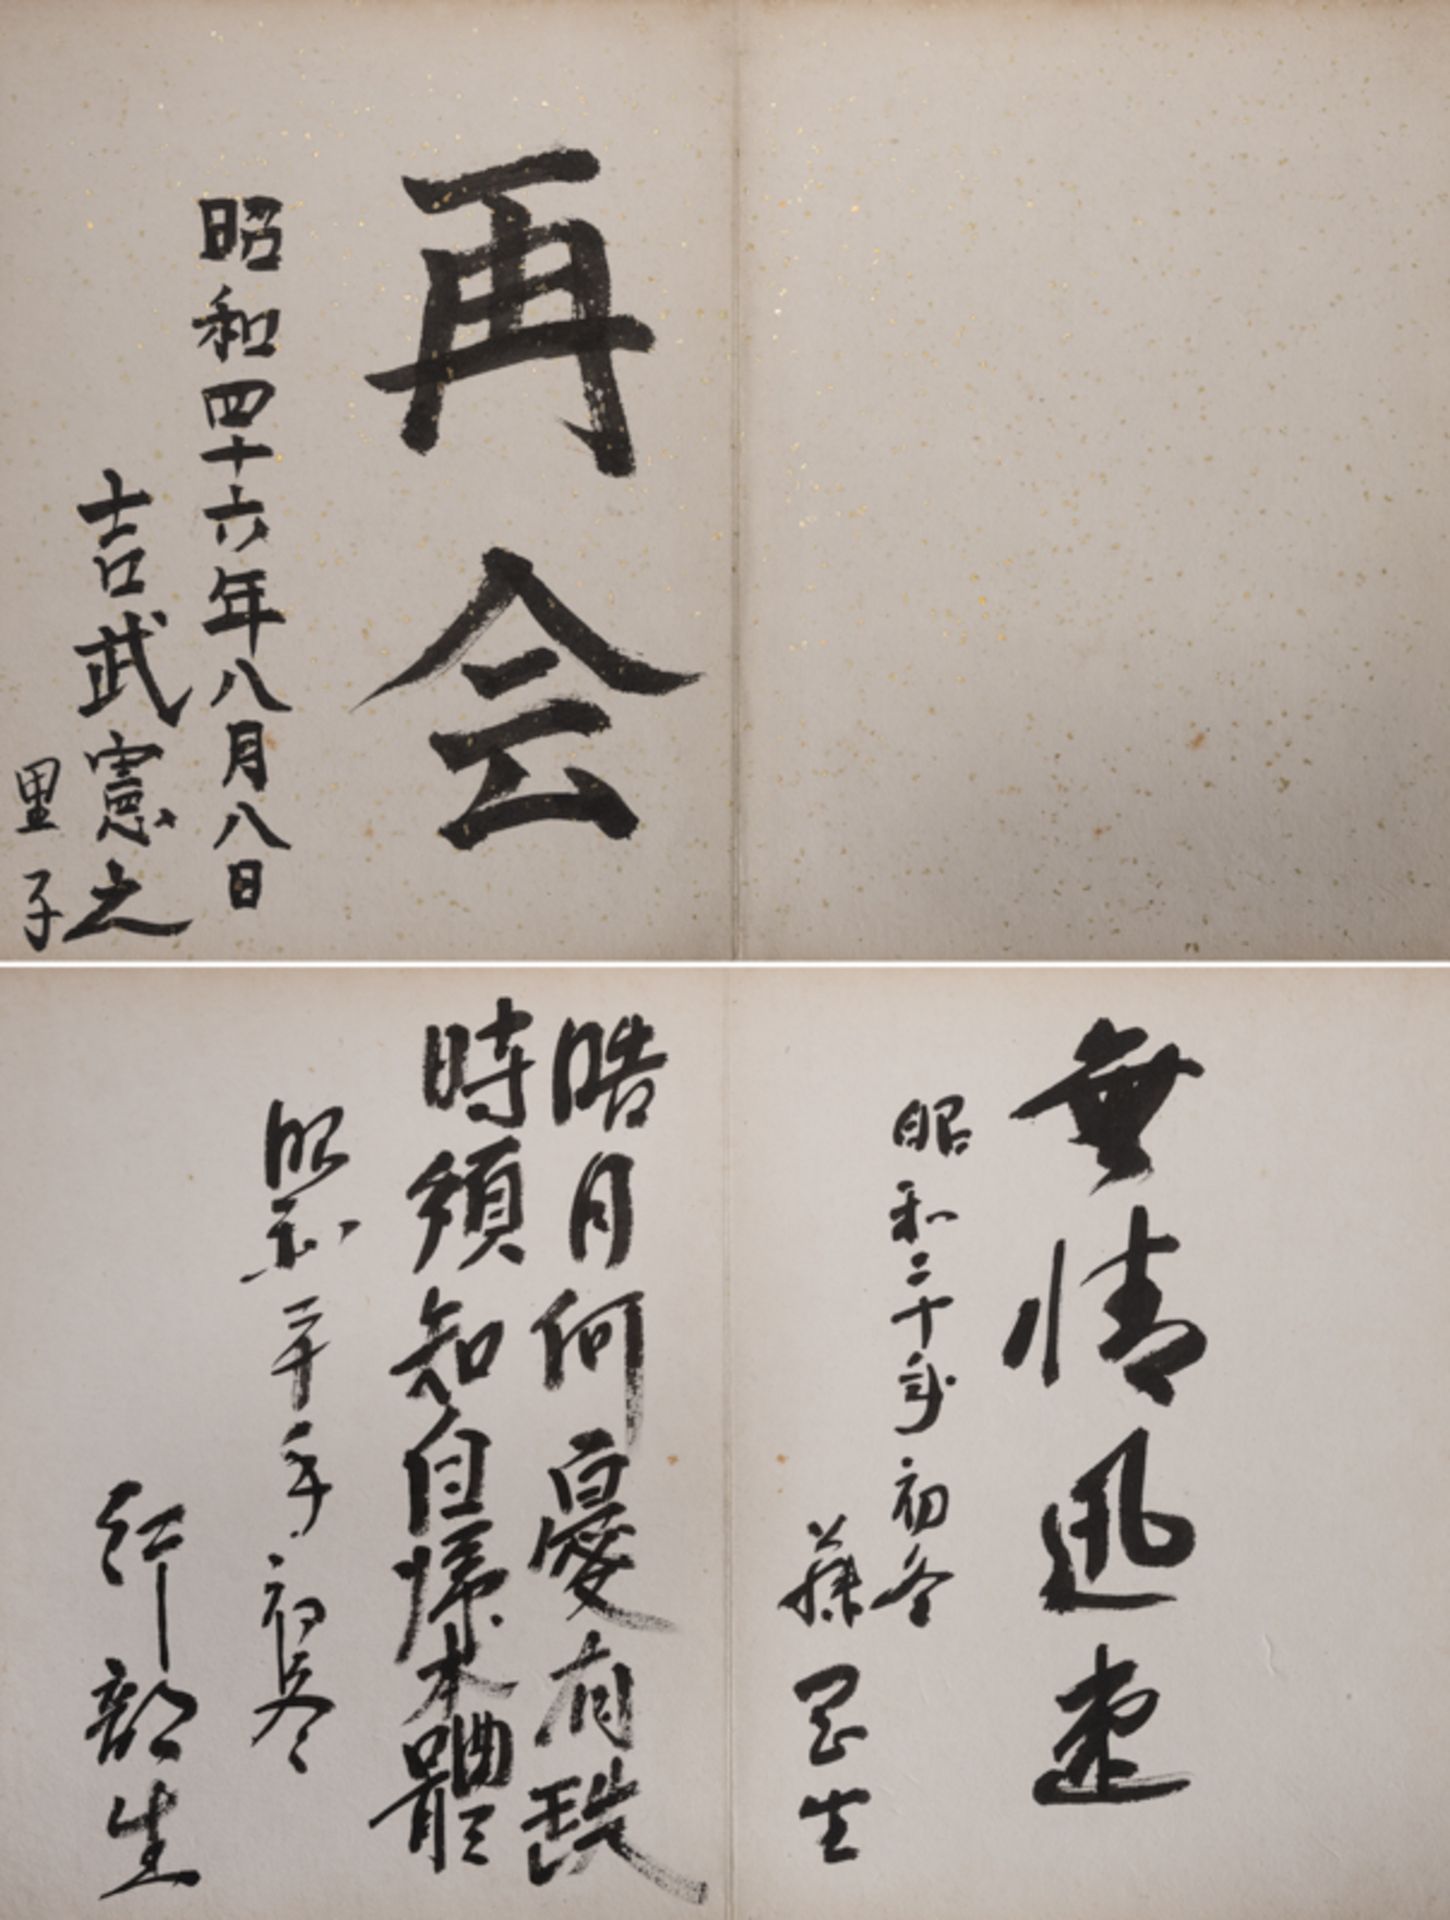 A BOOK OF CALLIGRAPHIES FROM SOME EAST ASIAN CELEBRITIES 東亞名人題字紀念冊頁 - Image 16 of 16